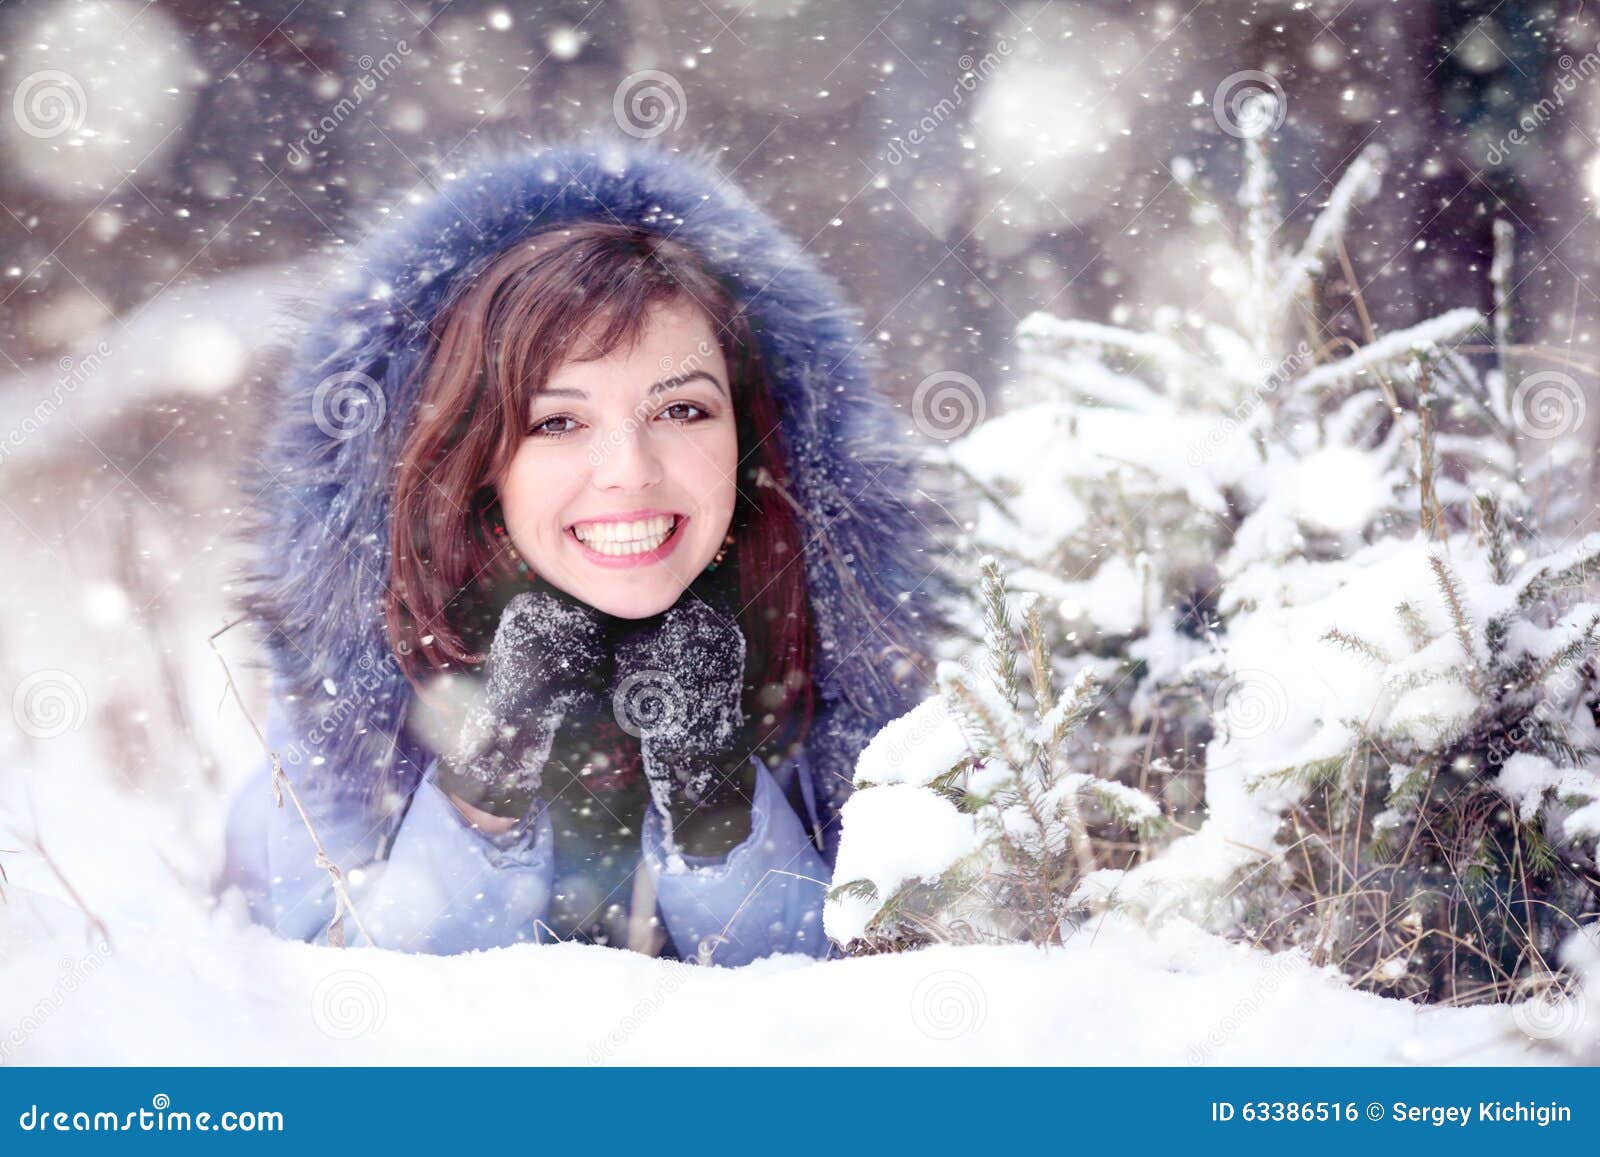 Girl lying in the snow stock photo. Image of pretty, smile - 63386516